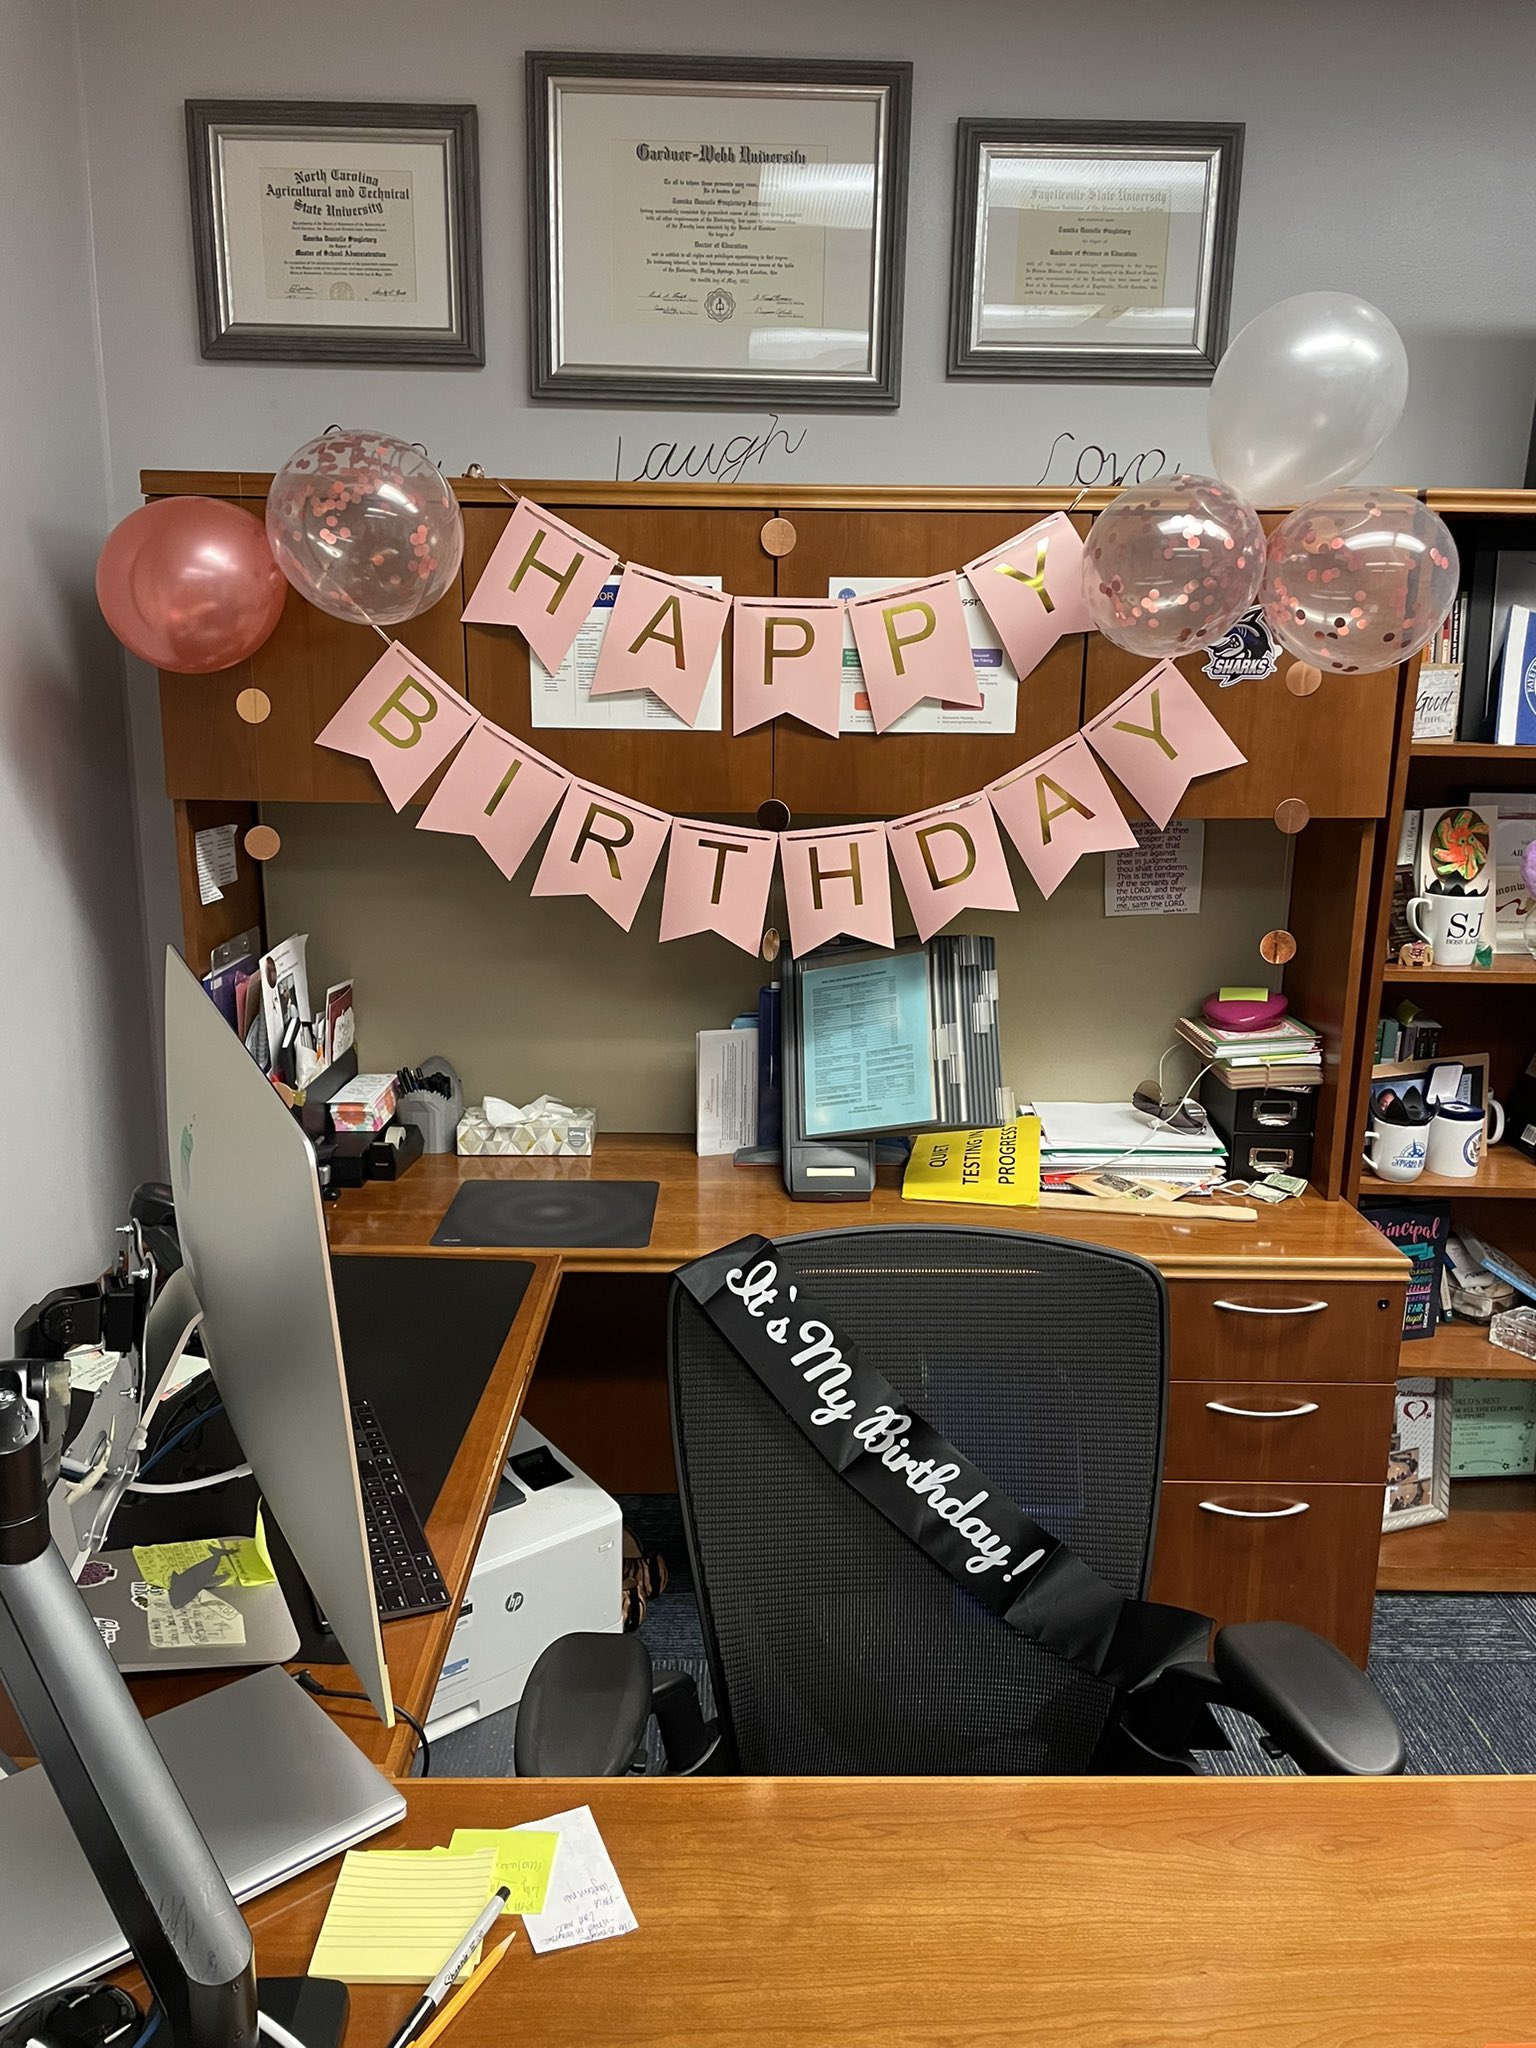 Make your desk shine desk birthday decorations with these ideas